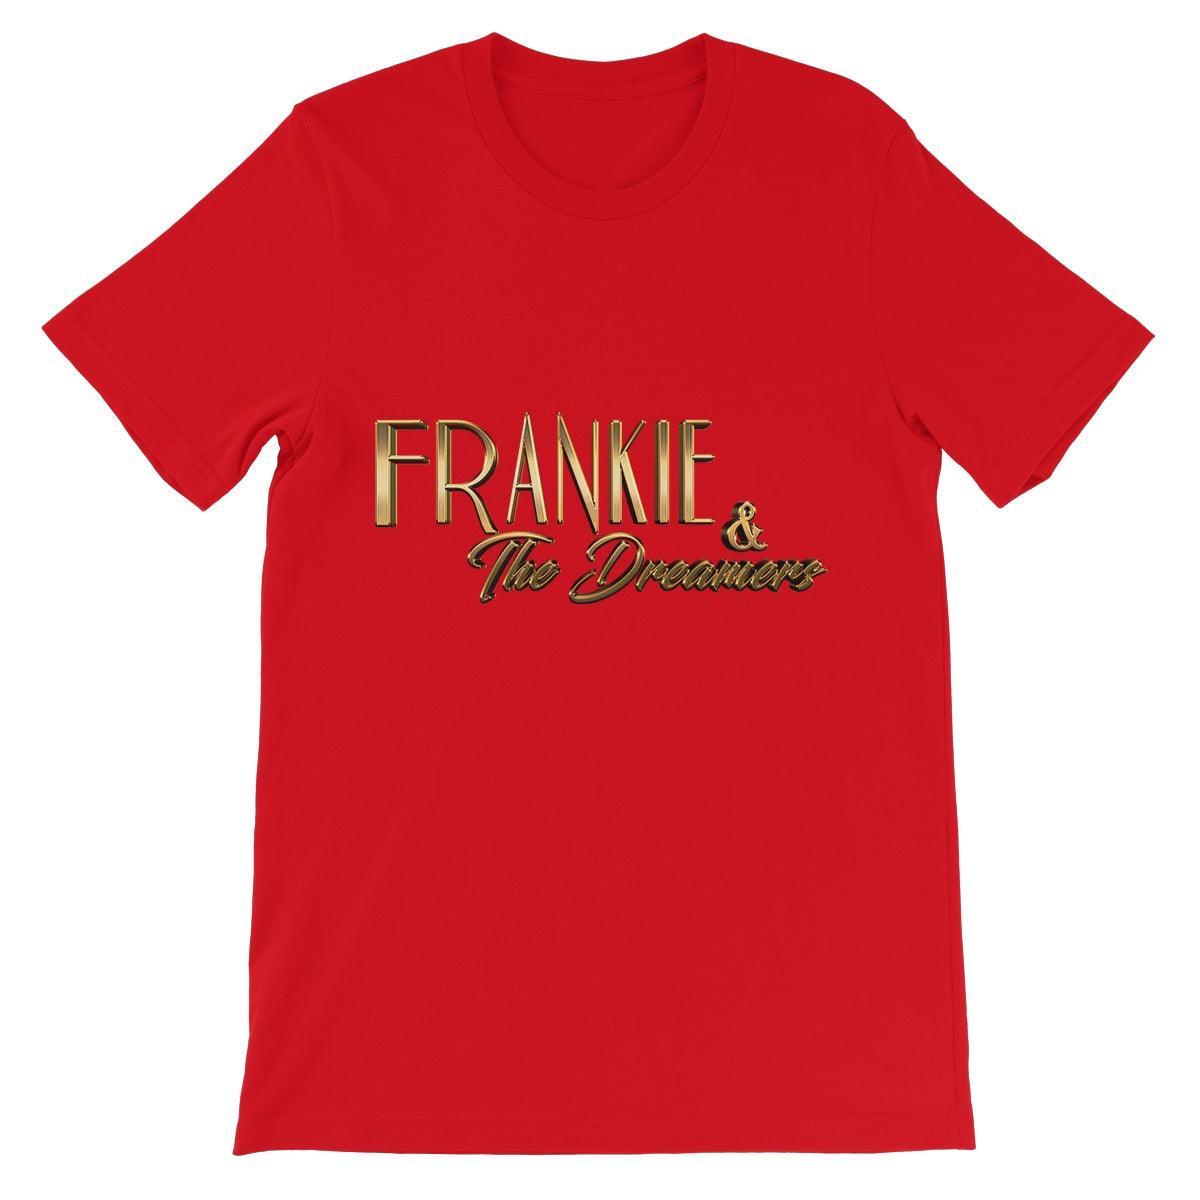 Frankie And The Dreamers Unisex Short Sleeve T-Shirt | Apparel Red